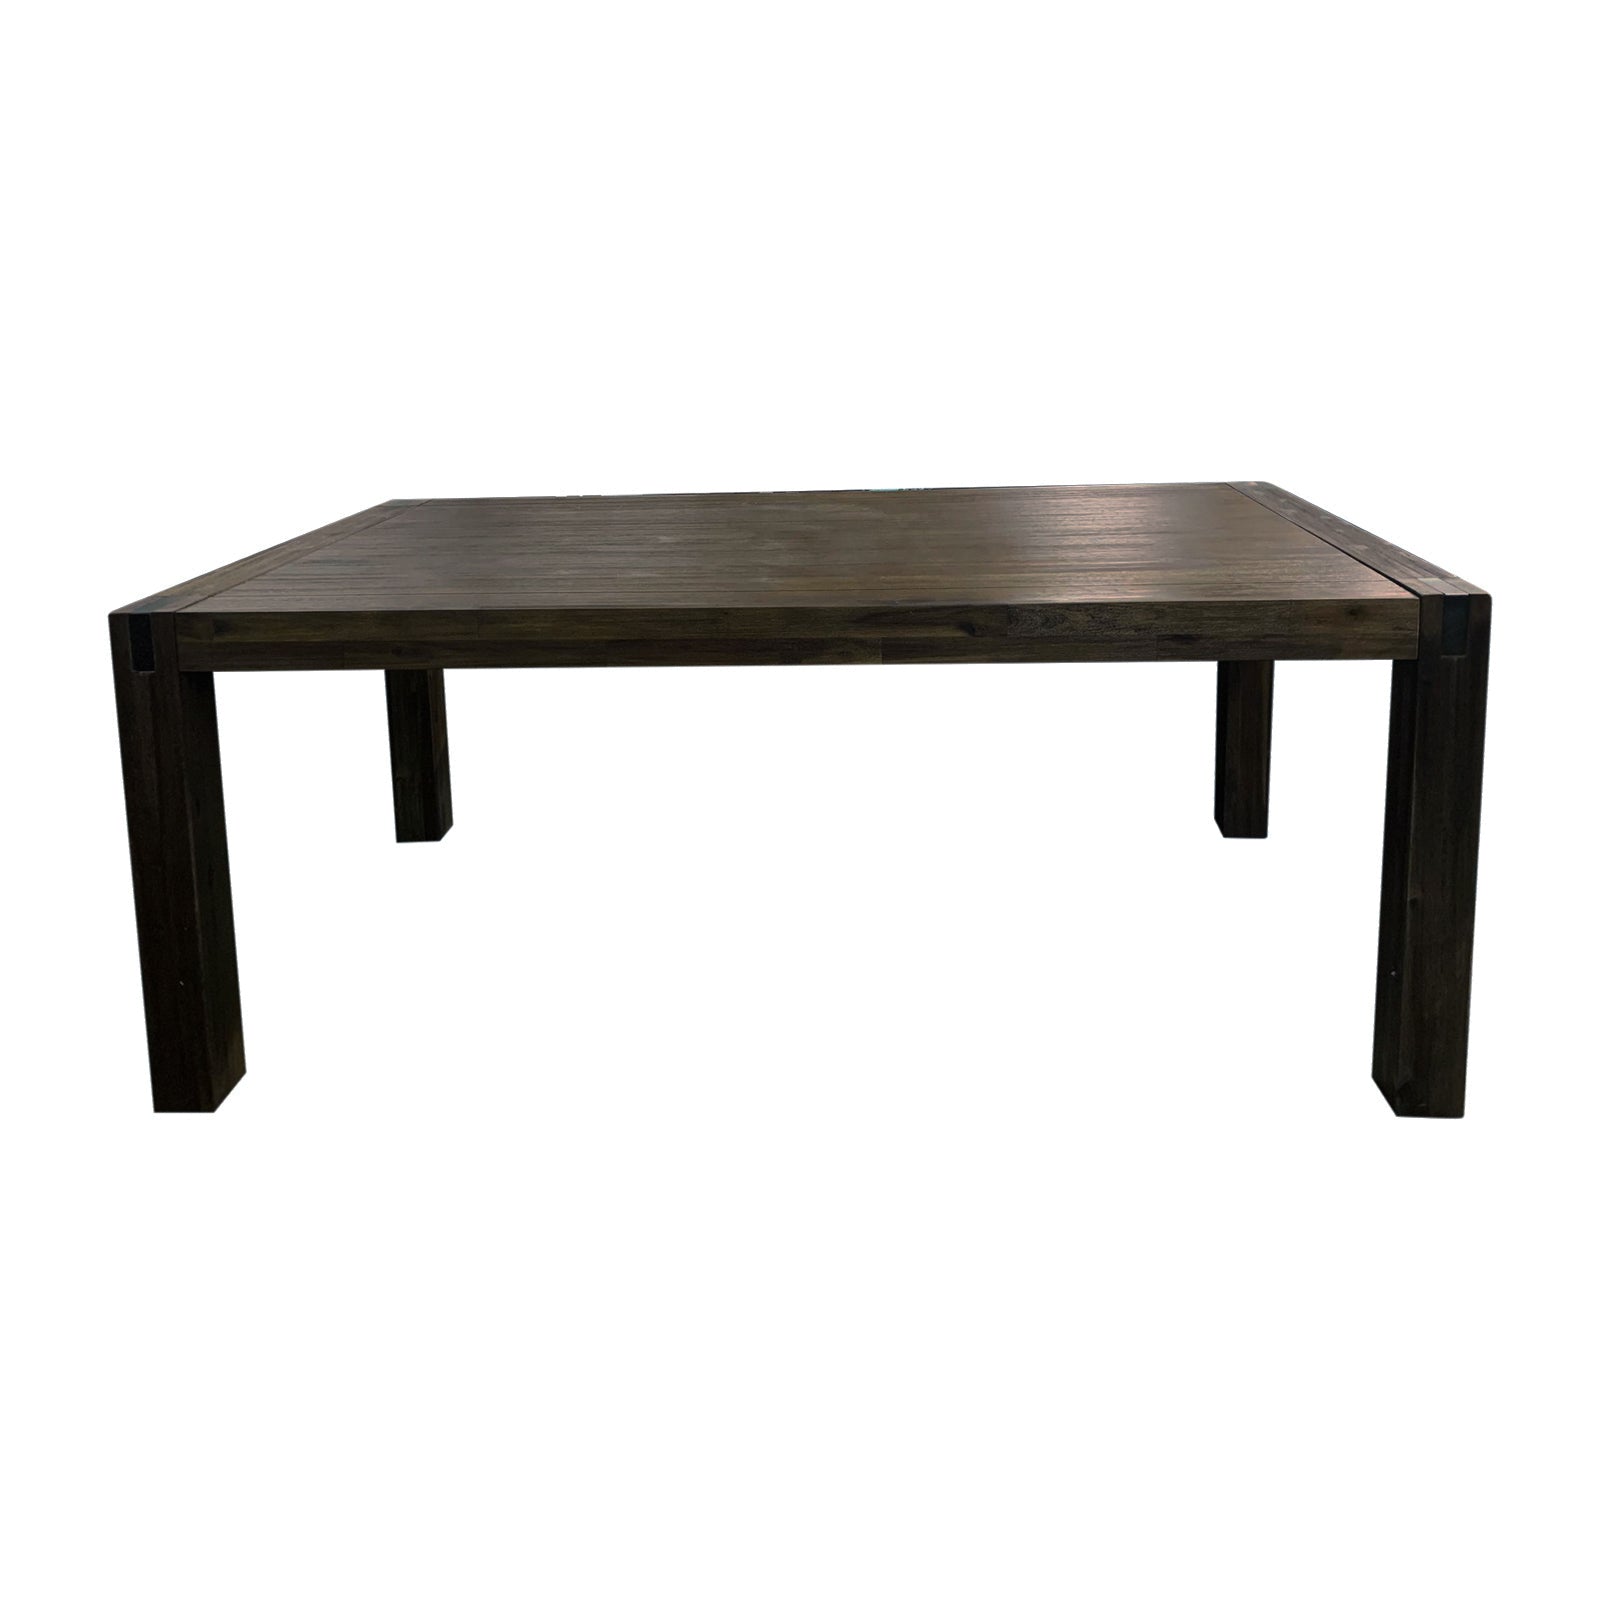 Dining Table 180cm Medium Size with Solid Acacia Wooden Base in Chocolate Colour - SILBERSHELL